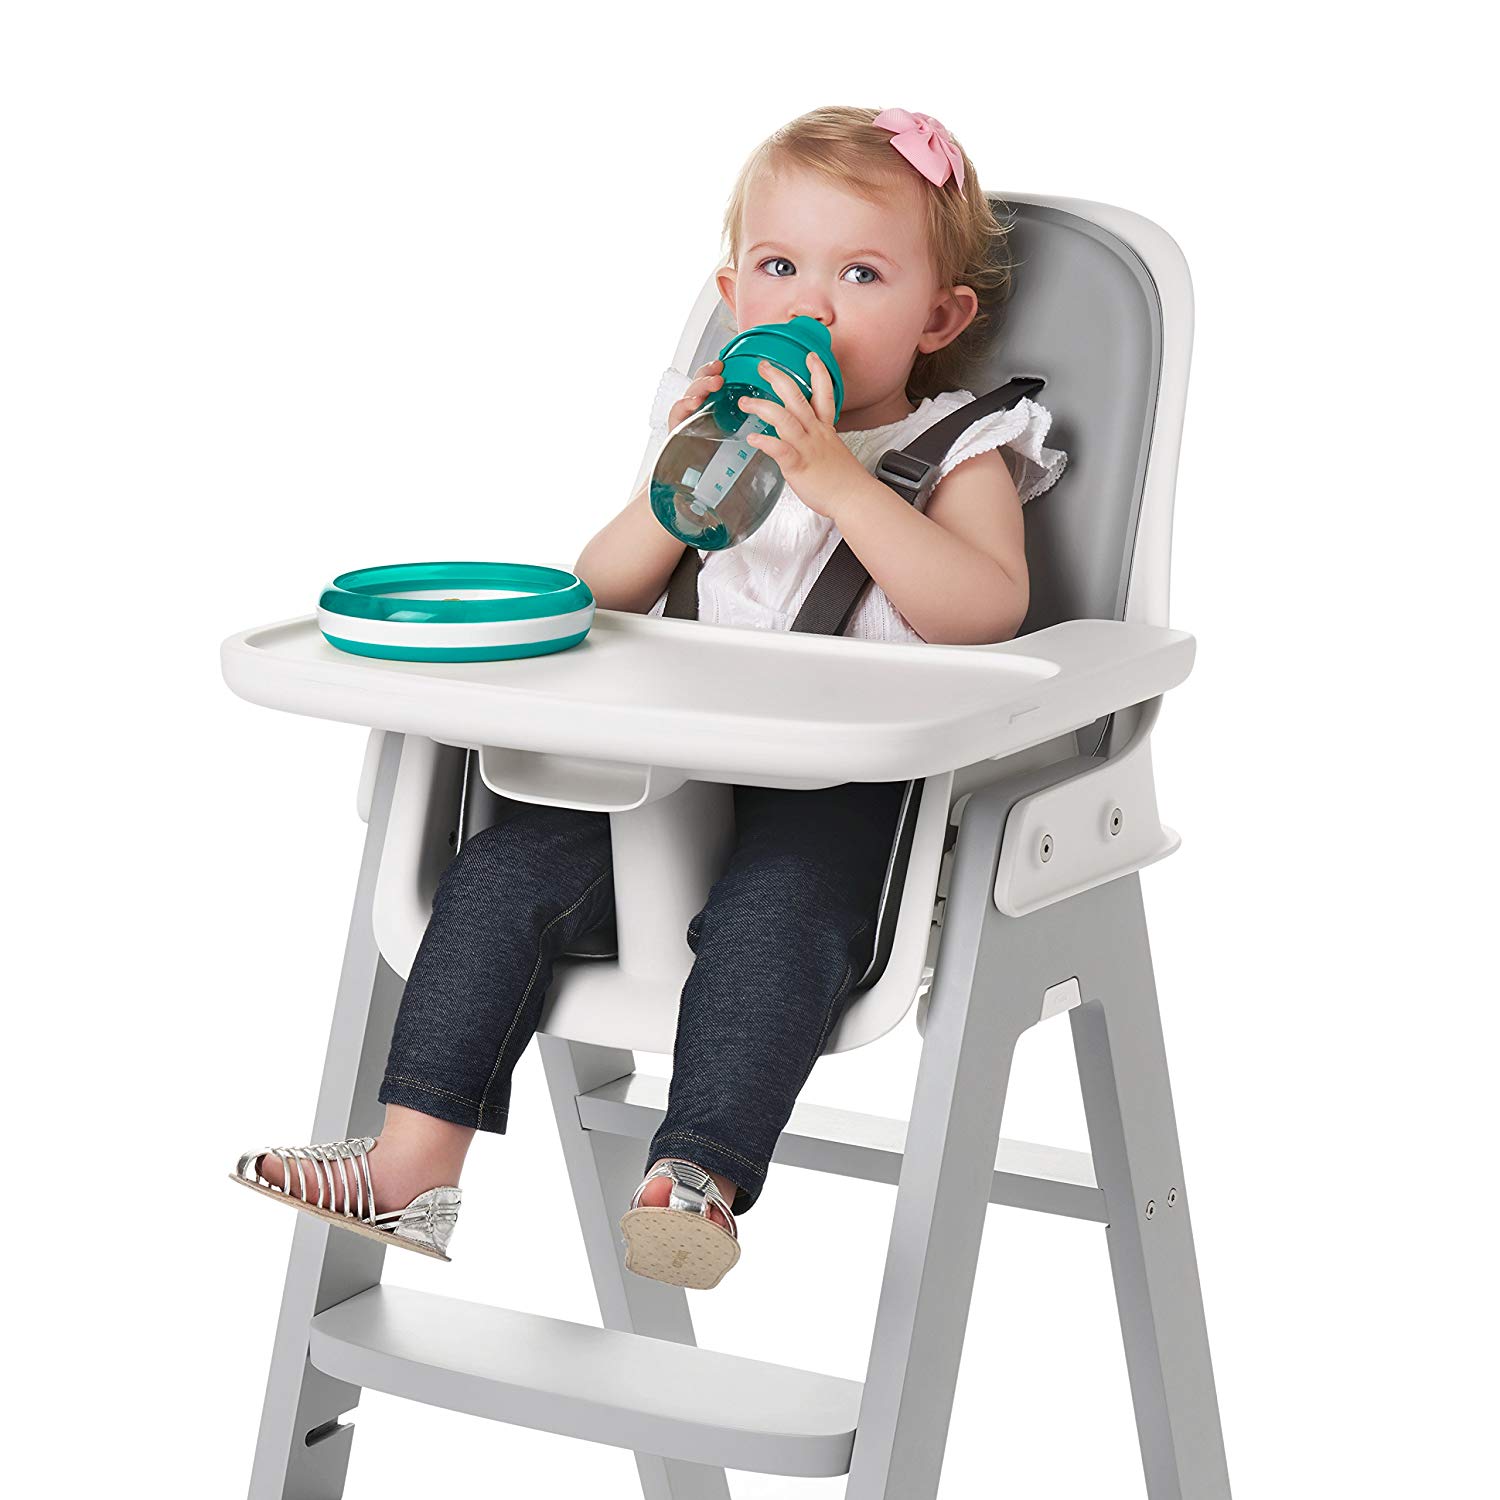  OXO Tot Transitions Straw Cup, 9 oz, Teal, Pack of 2 : Baby